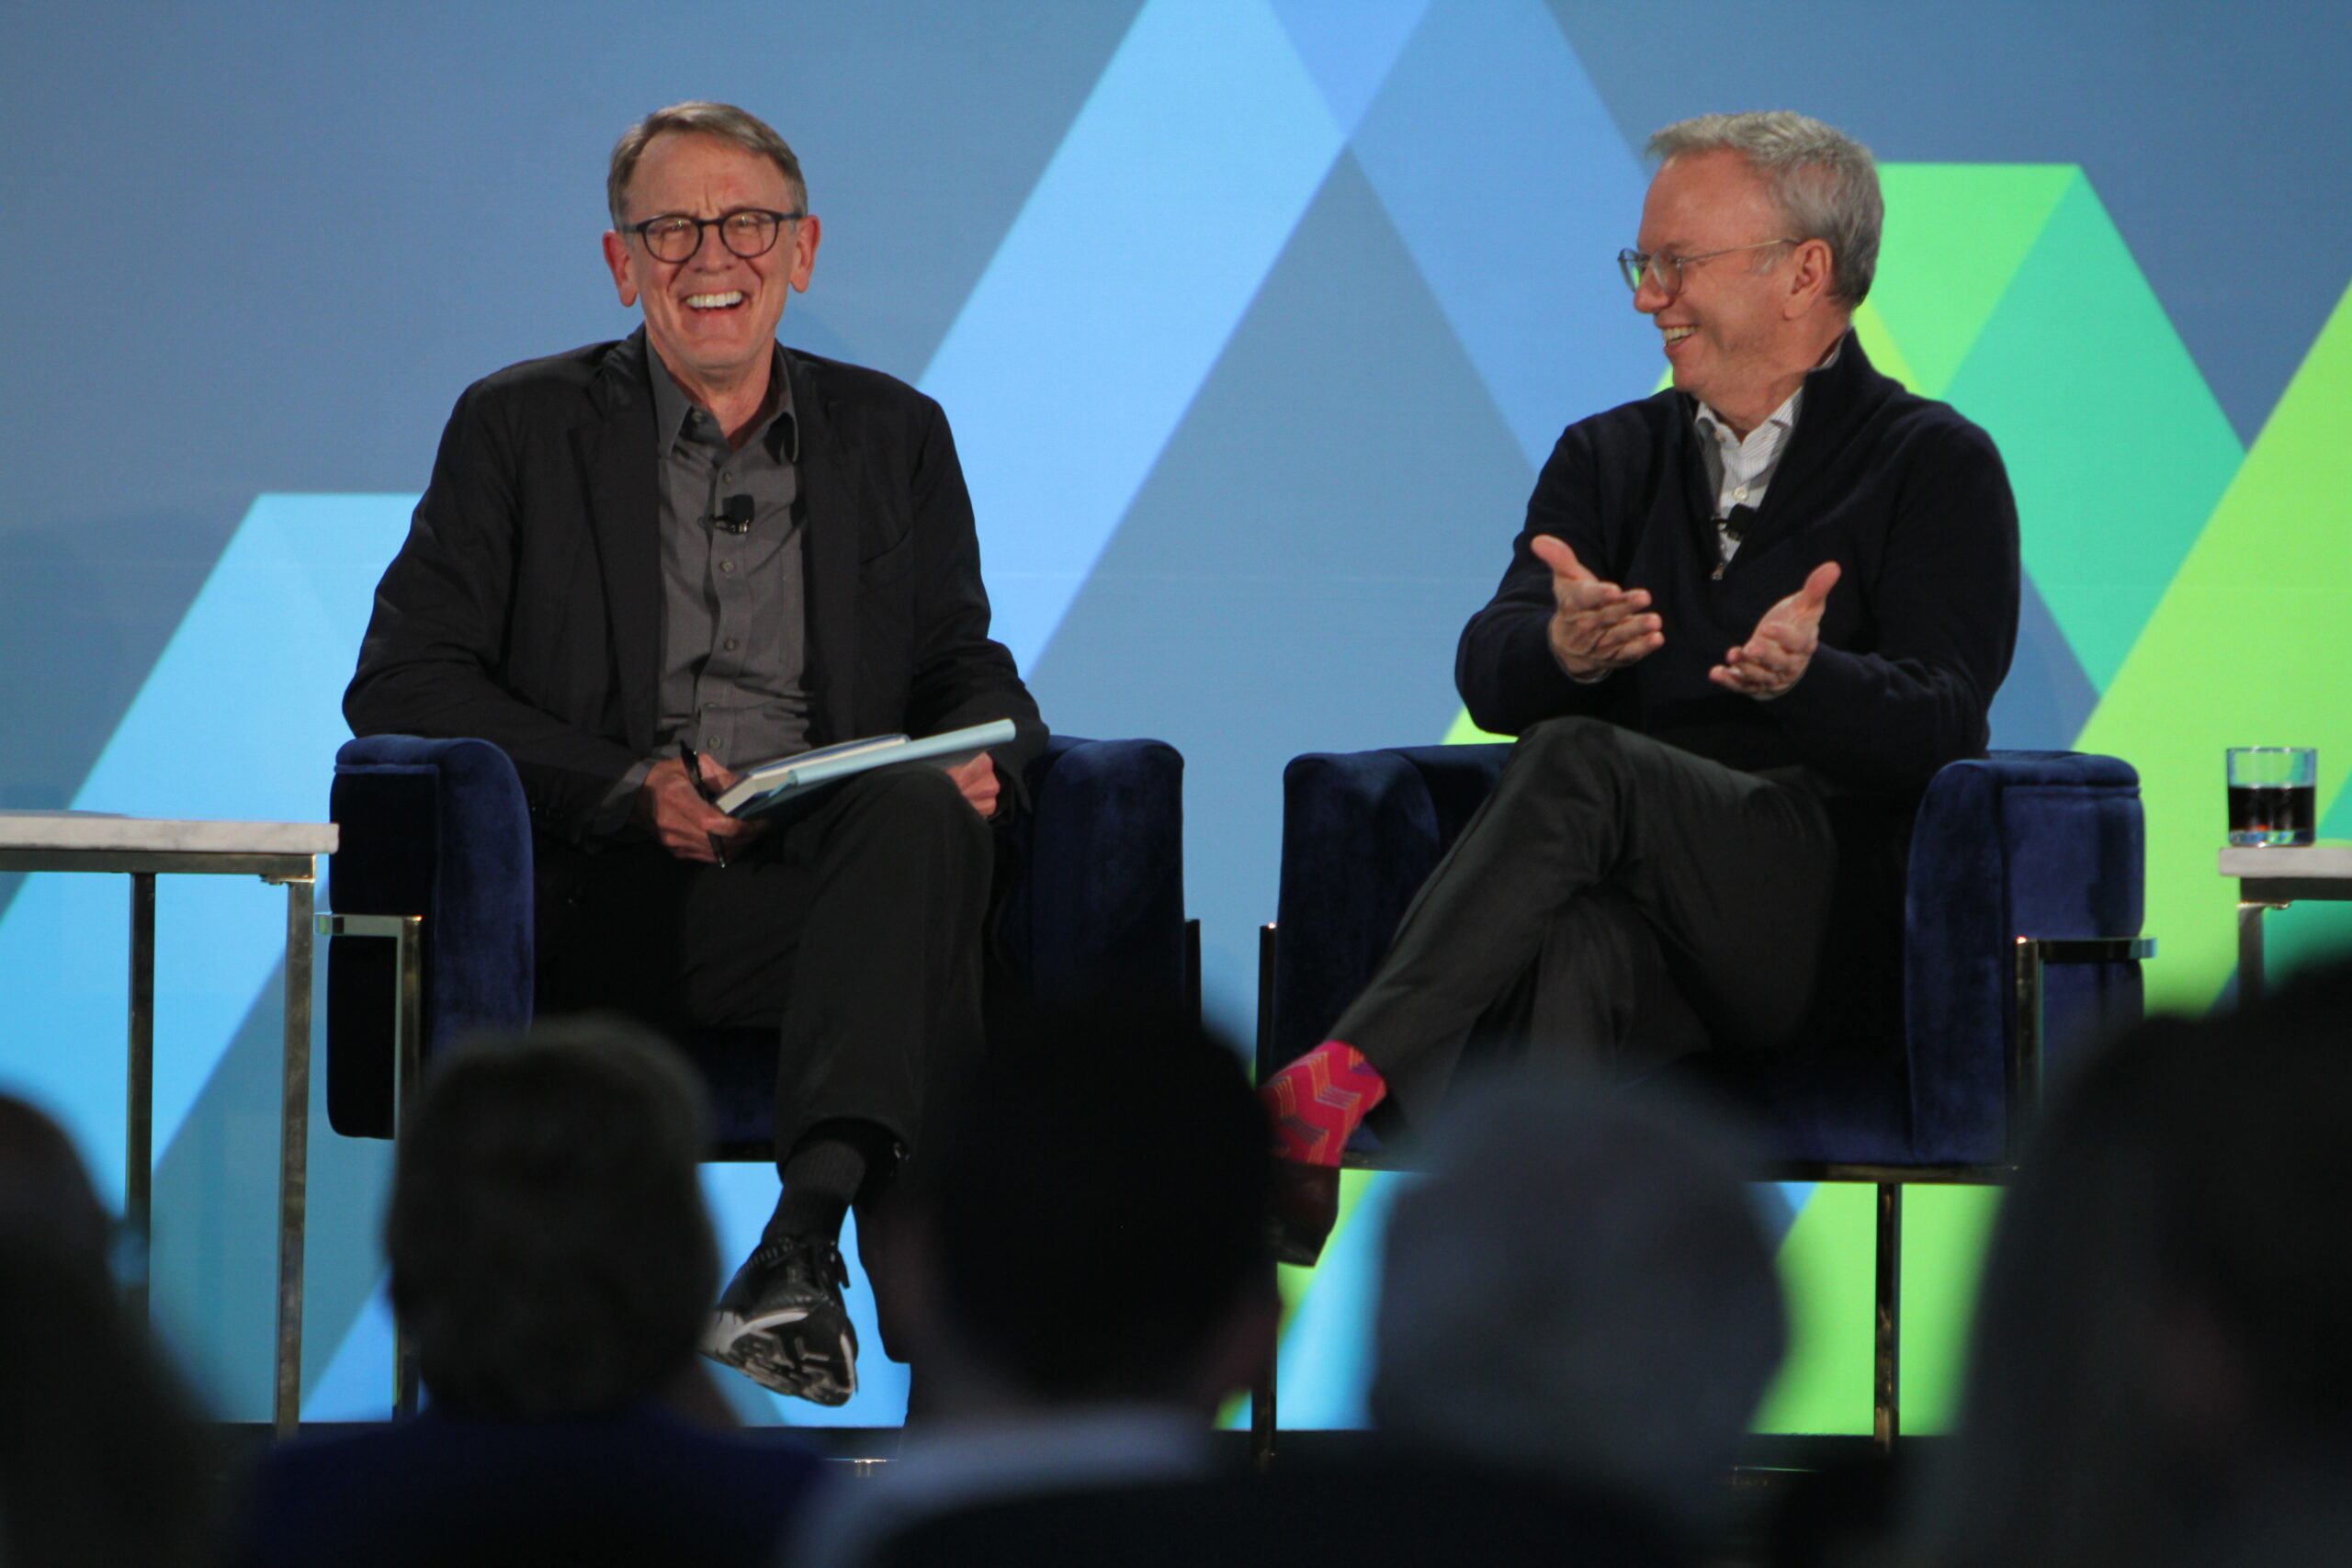 Eric Schmidt and John Doerr discuss the compromise big tech and health care need next